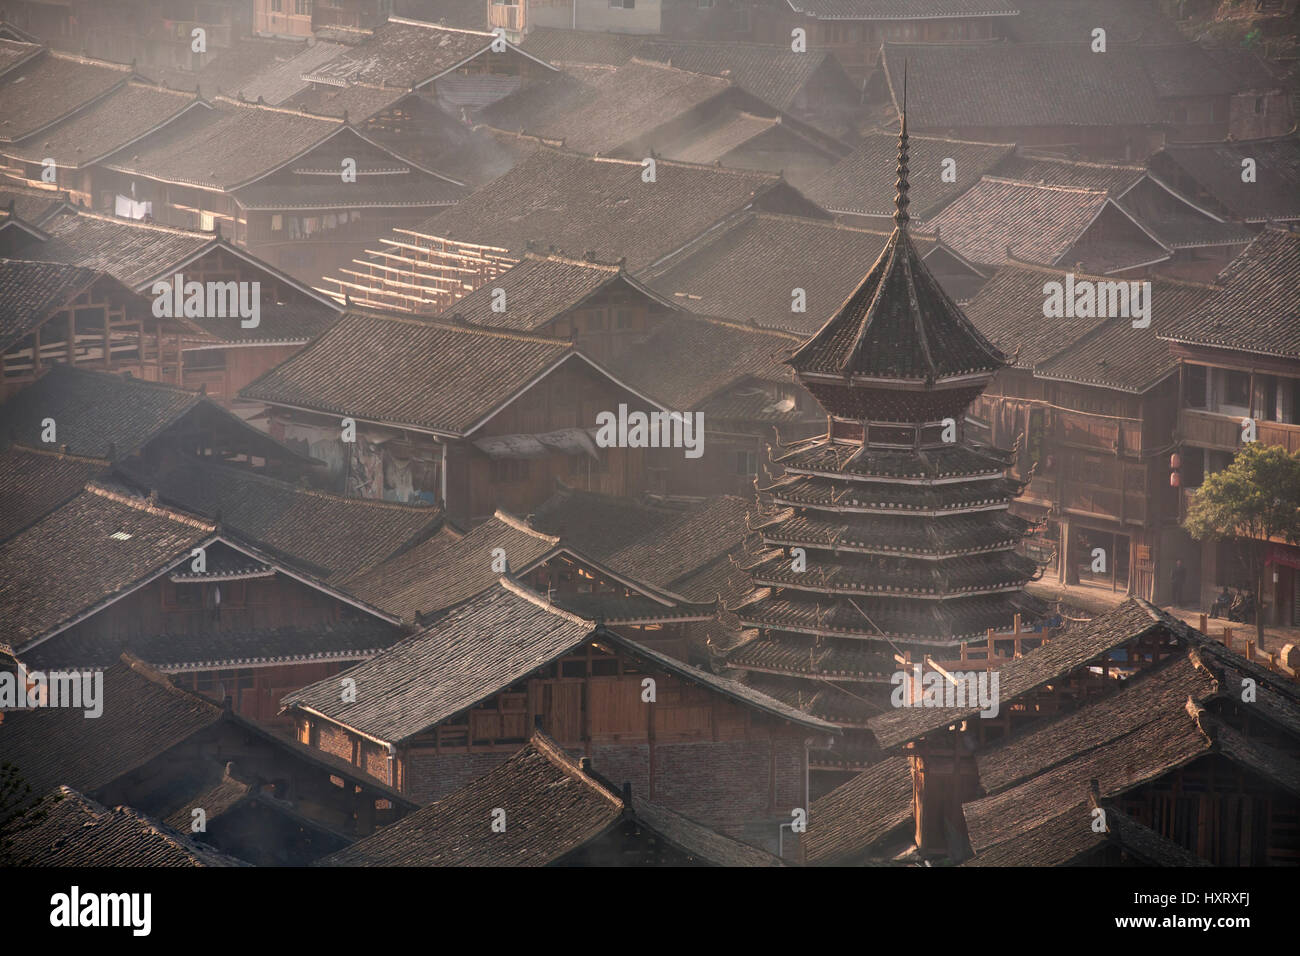 Zhaoxing Dong Village, Guizhou Province, China -  April 9, 2010: Tile roofs of wooden houses of Chinese peasants in the village of Dong ethnic minorit Stock Photo